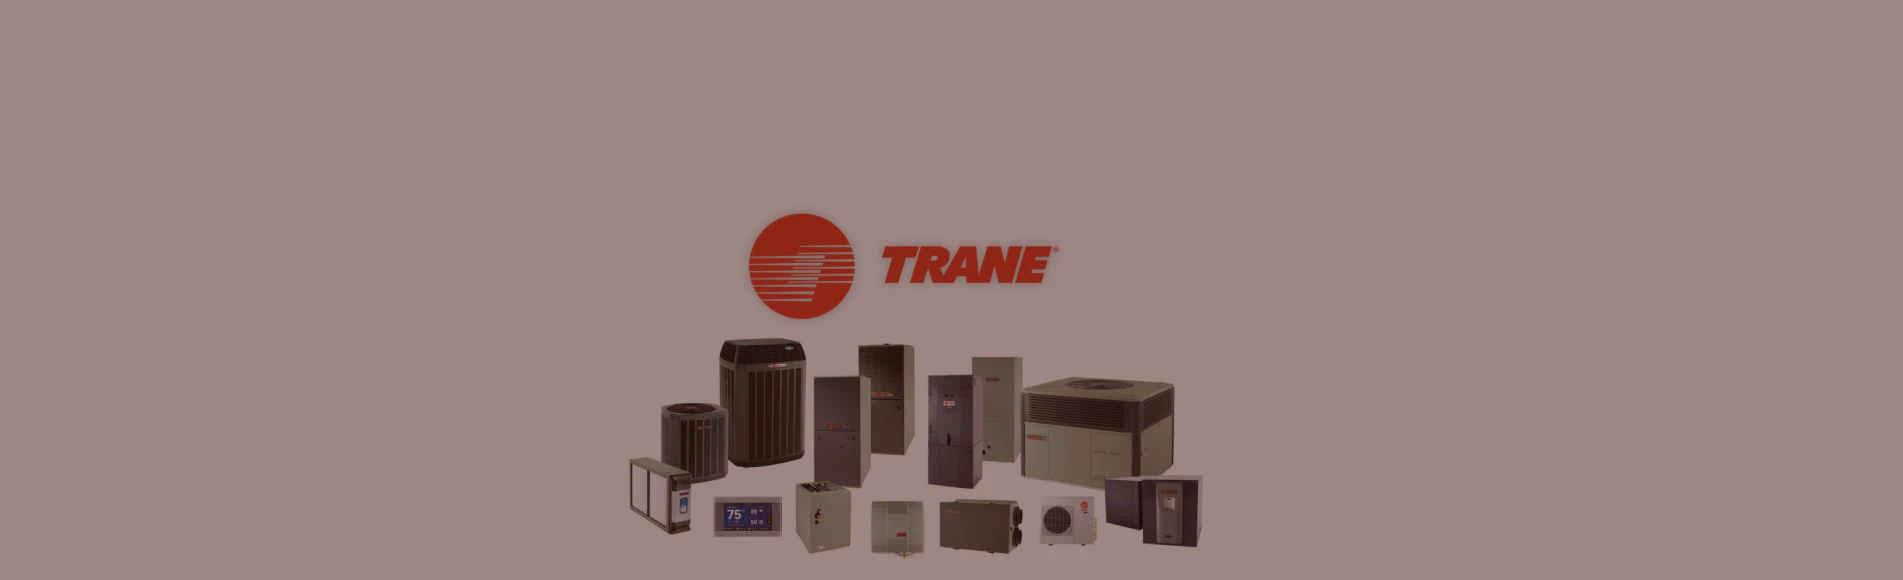 tru comfort heating cooling offers trane heating cooling products breadcrumb hero 2